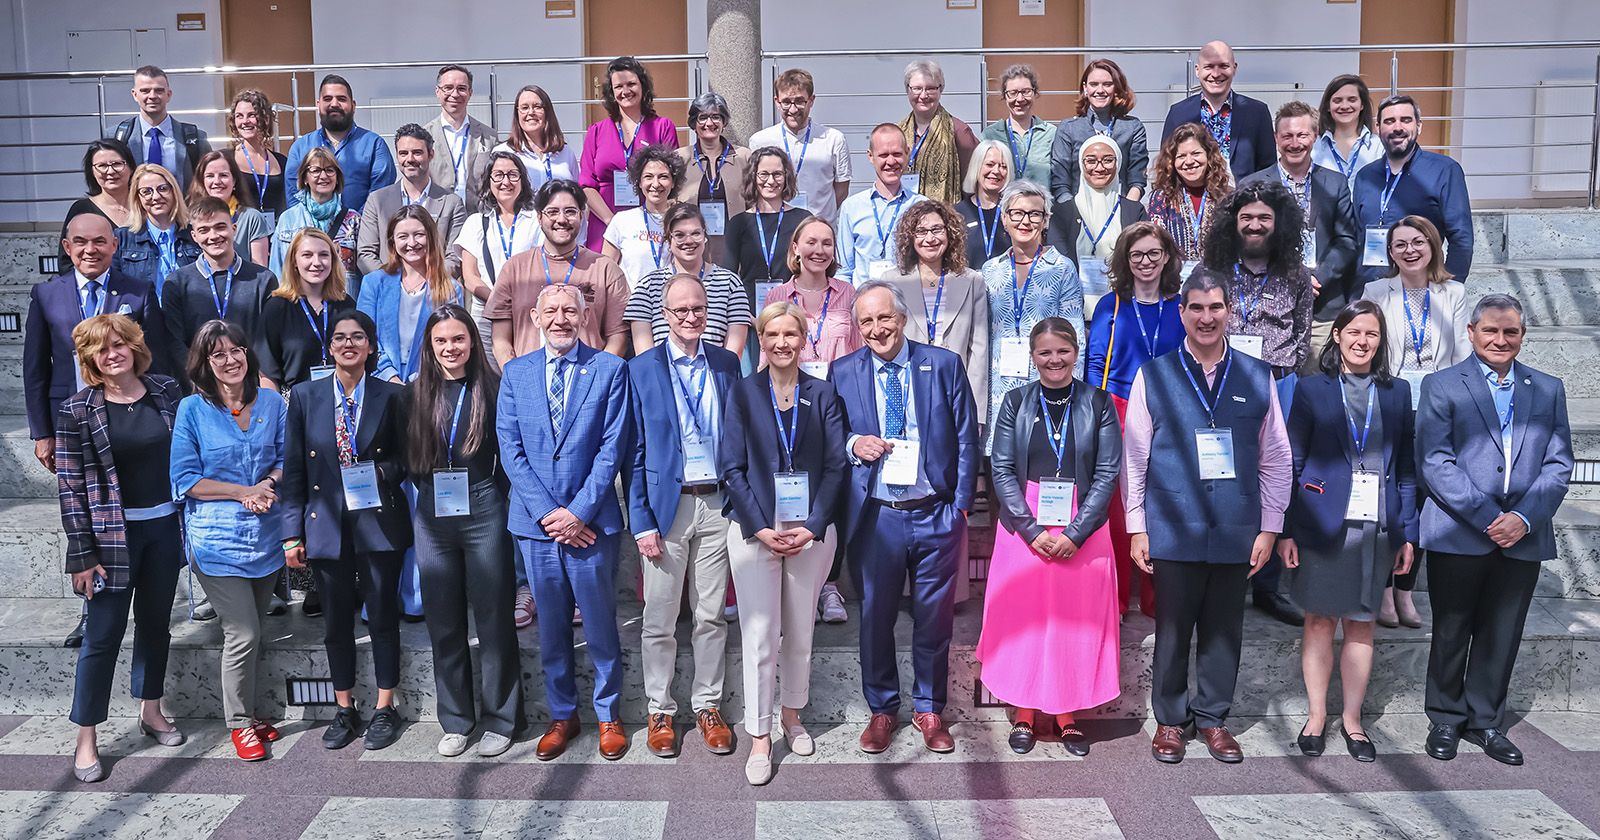 Those who have a role in the YUFE as project coordinators, work package leaders or sit on the Strategic Board or Executive Committee of the alliance came to Toruń to participate in the Forum 